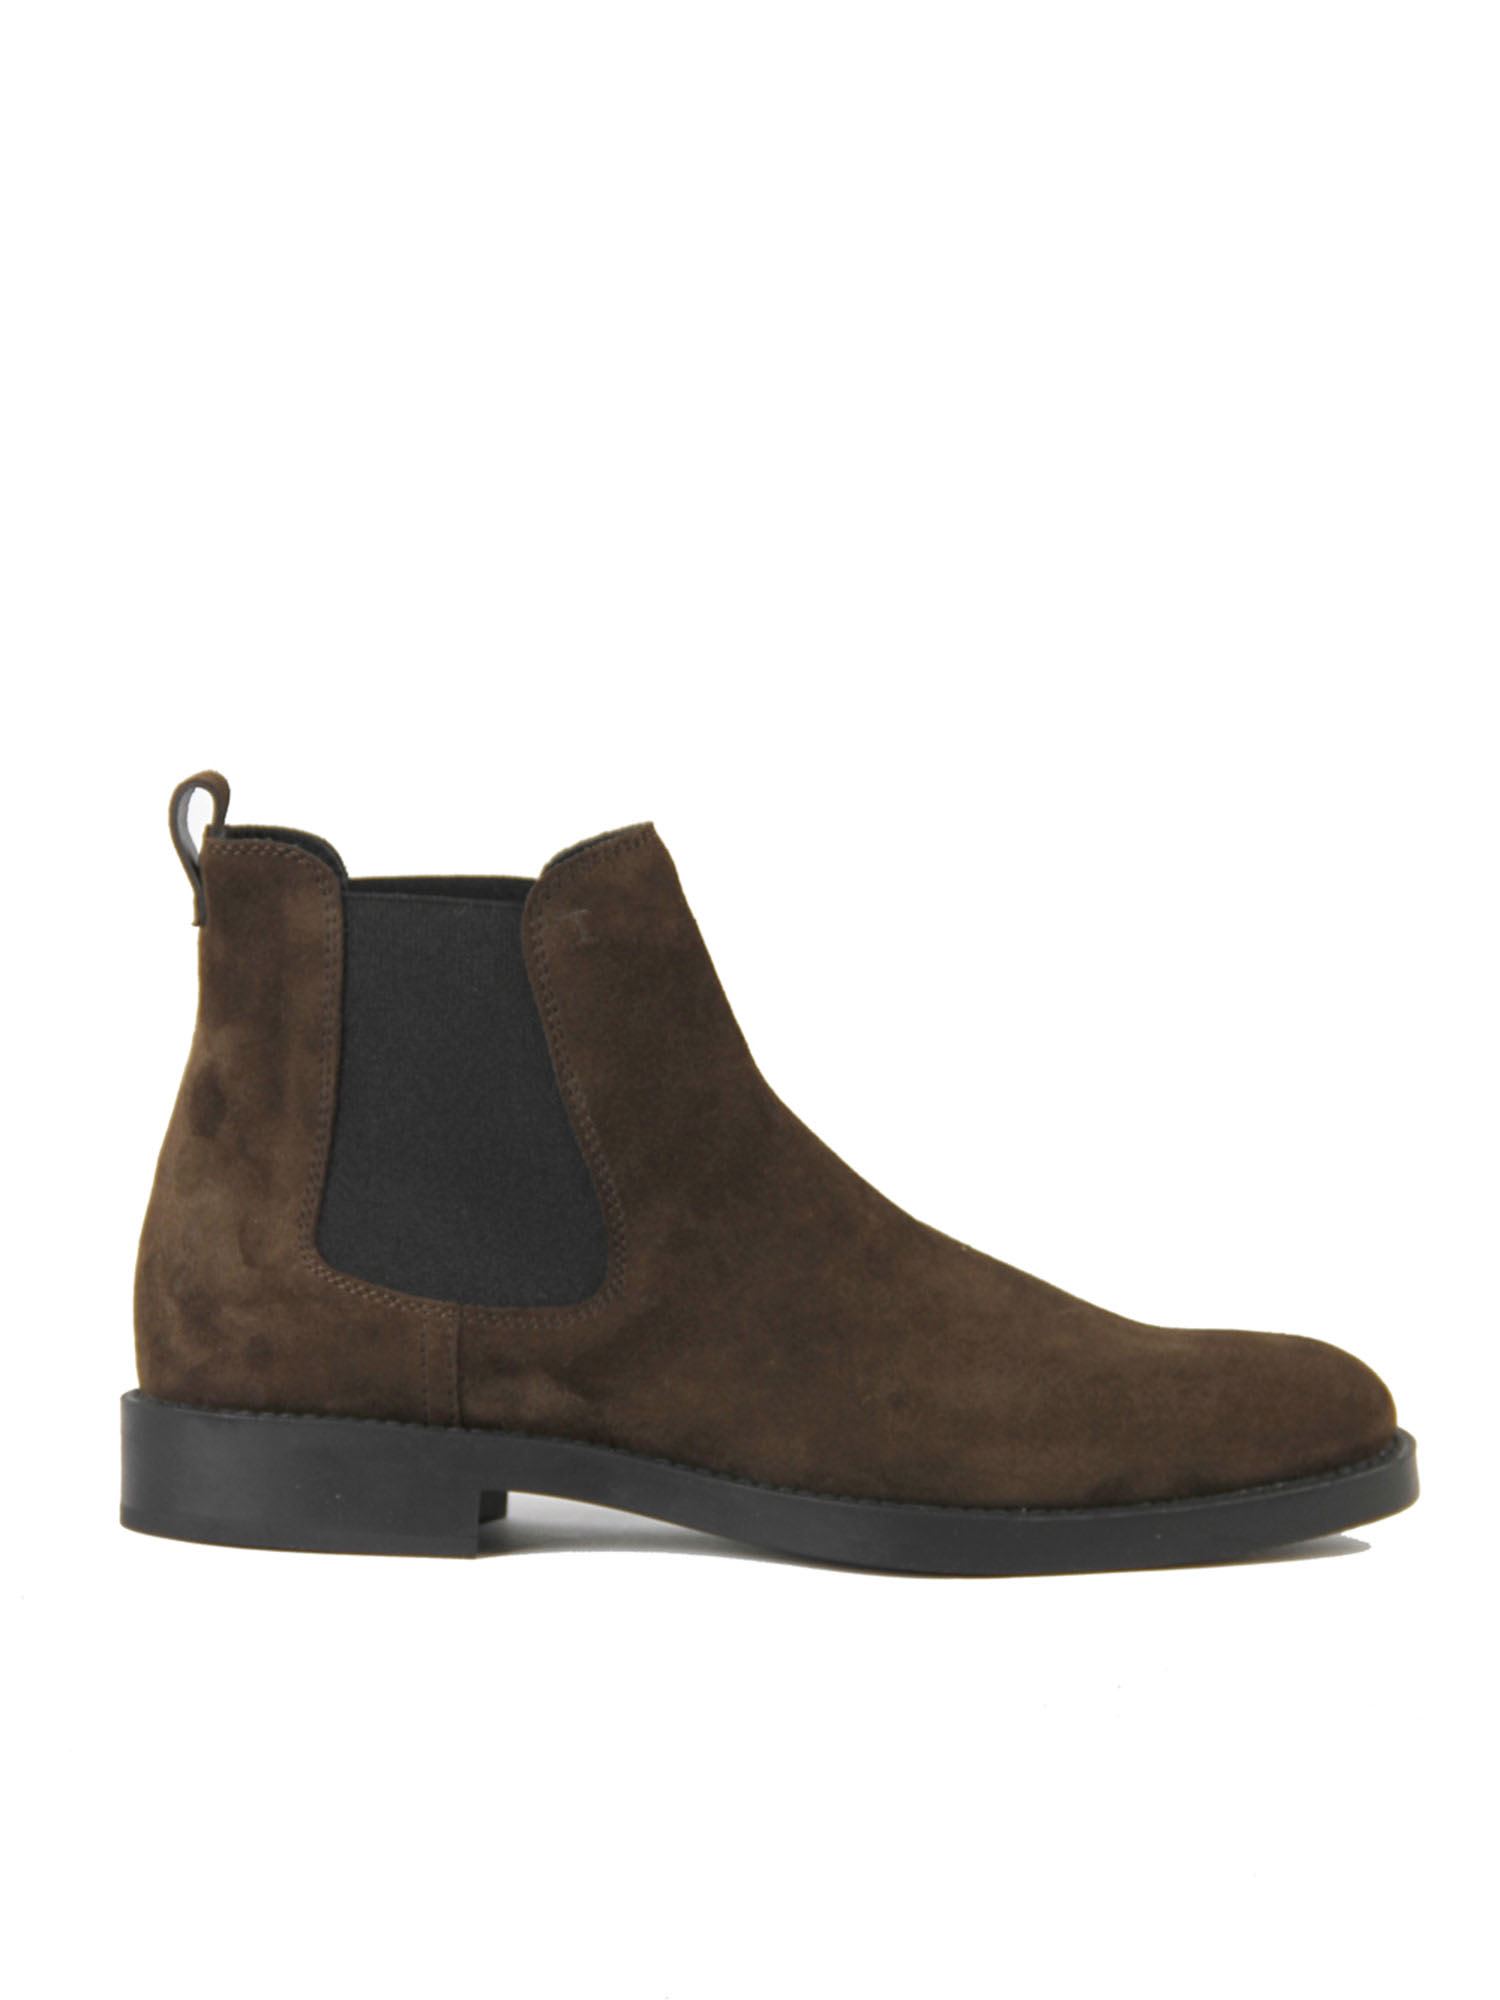 Tods Suede Leather Chelsea Boots In Brown